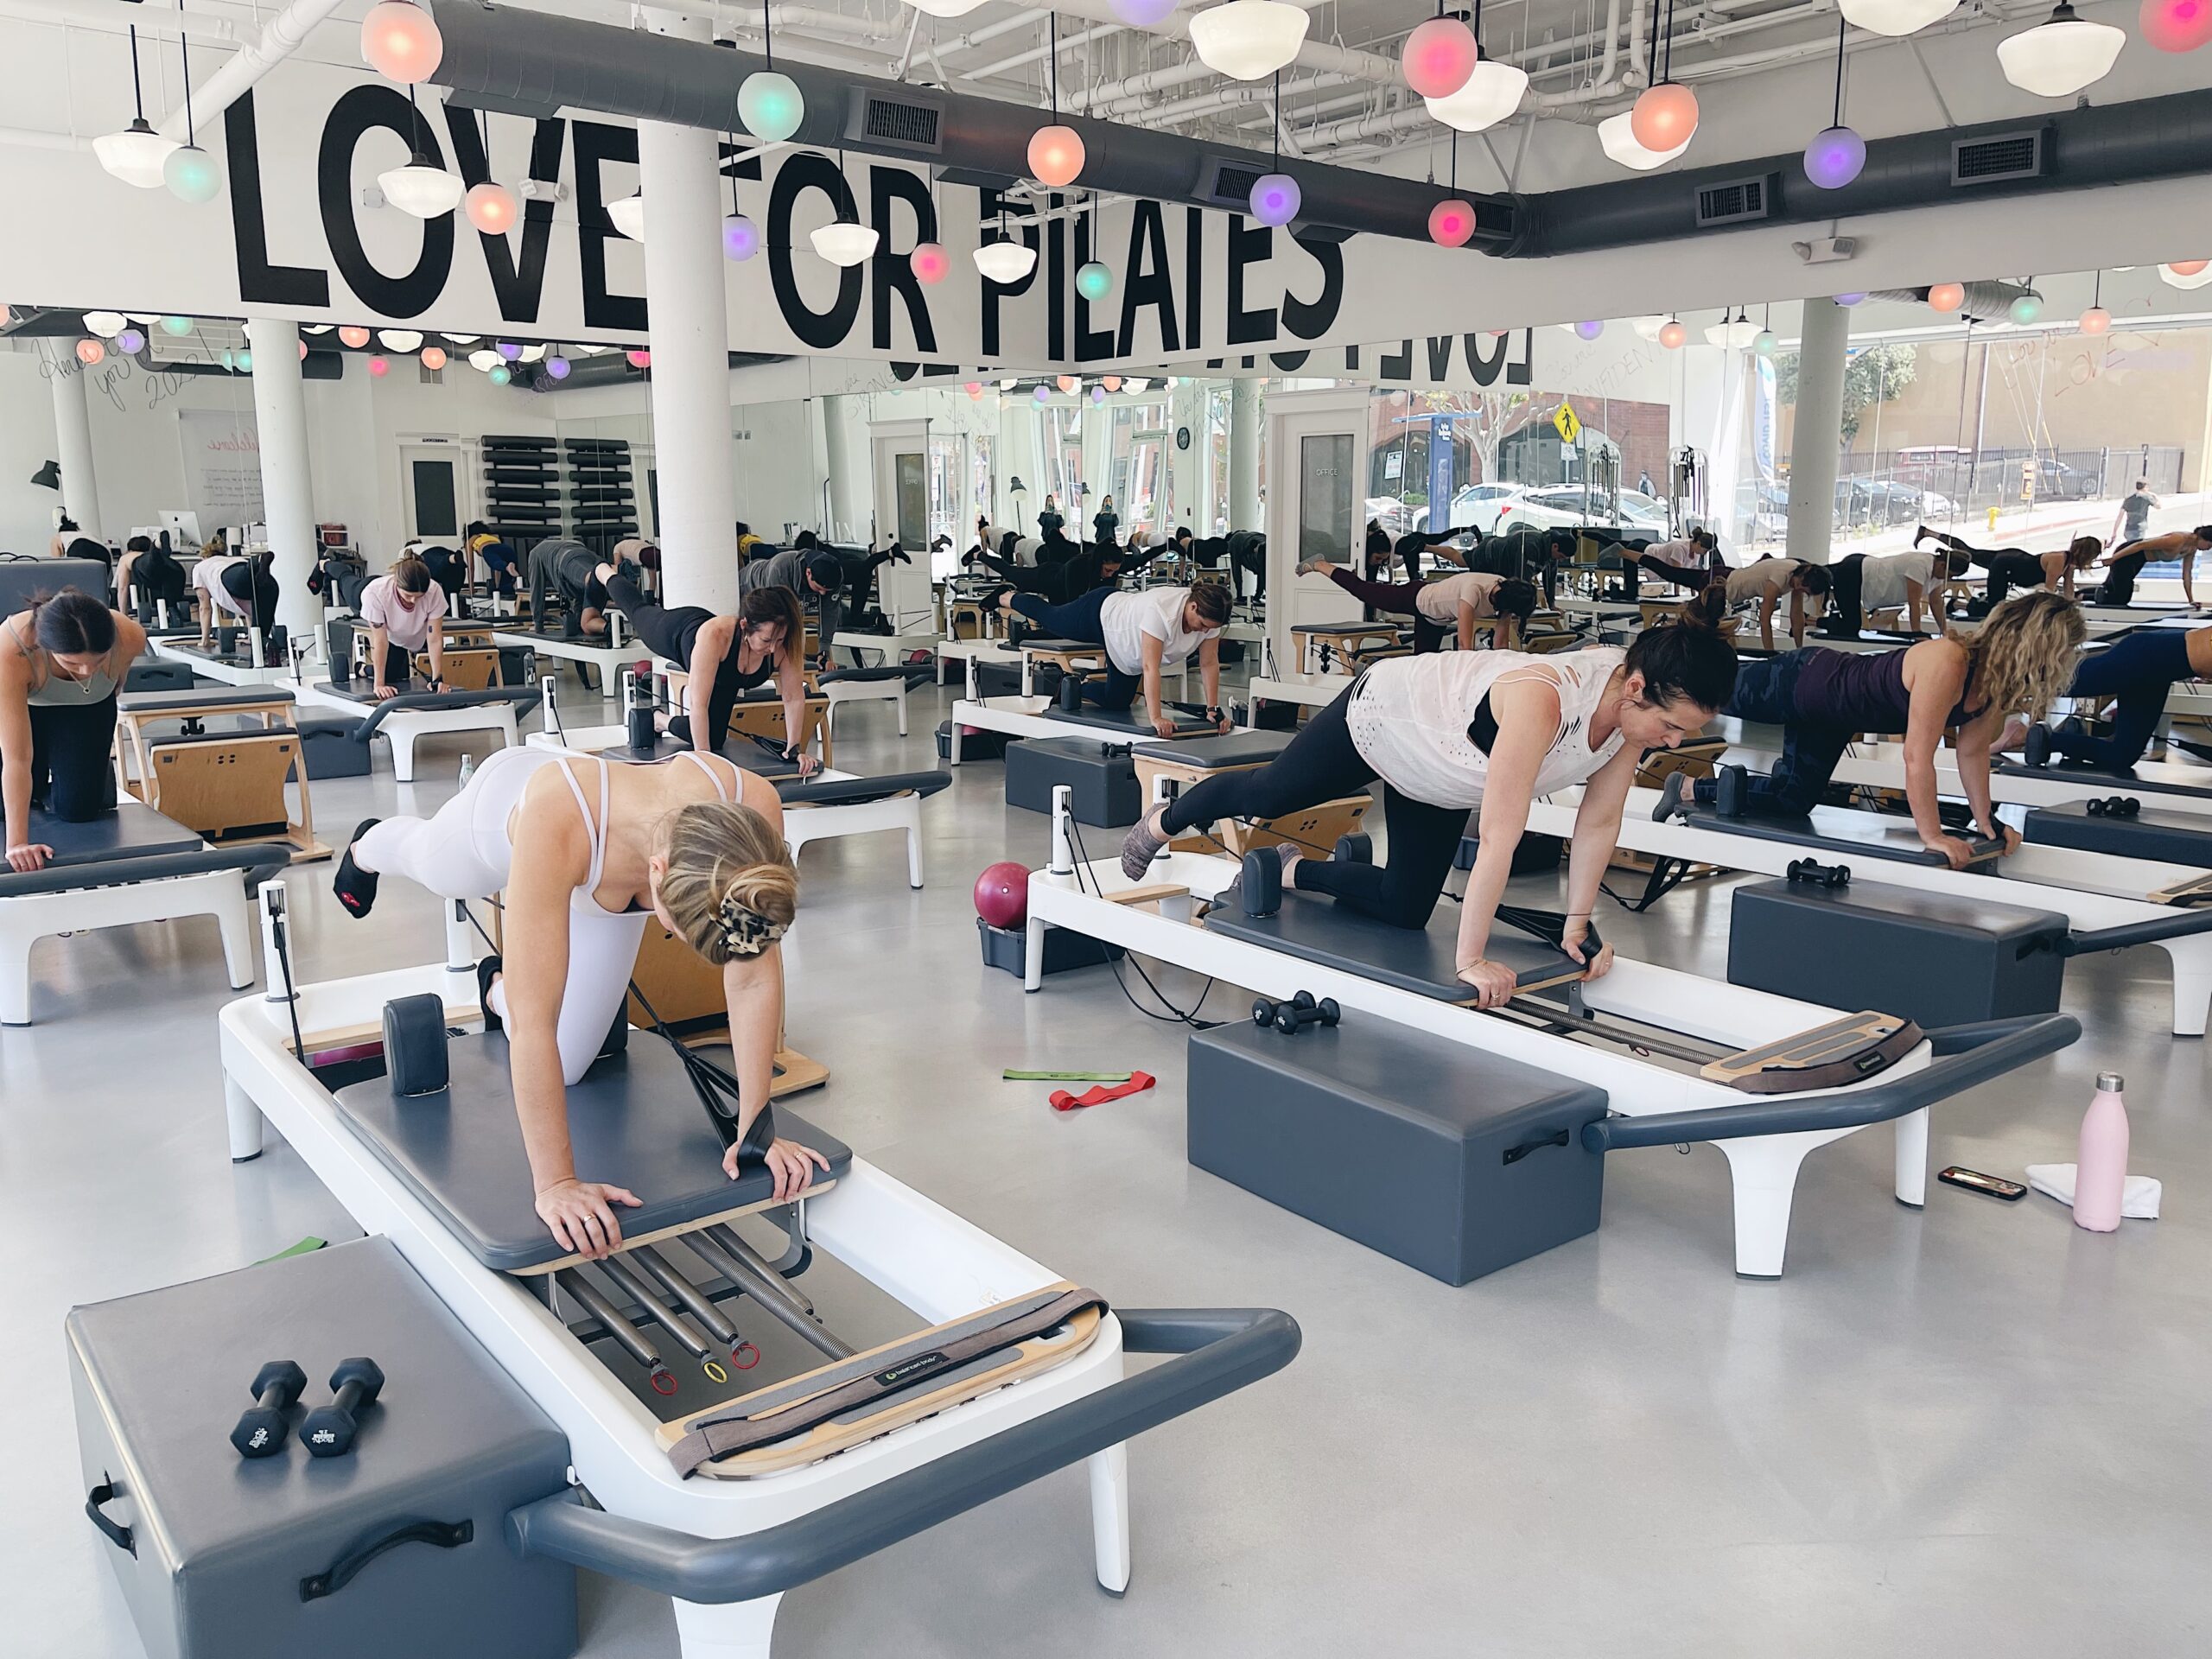 Group Pilates Class in Los Angeles, CA